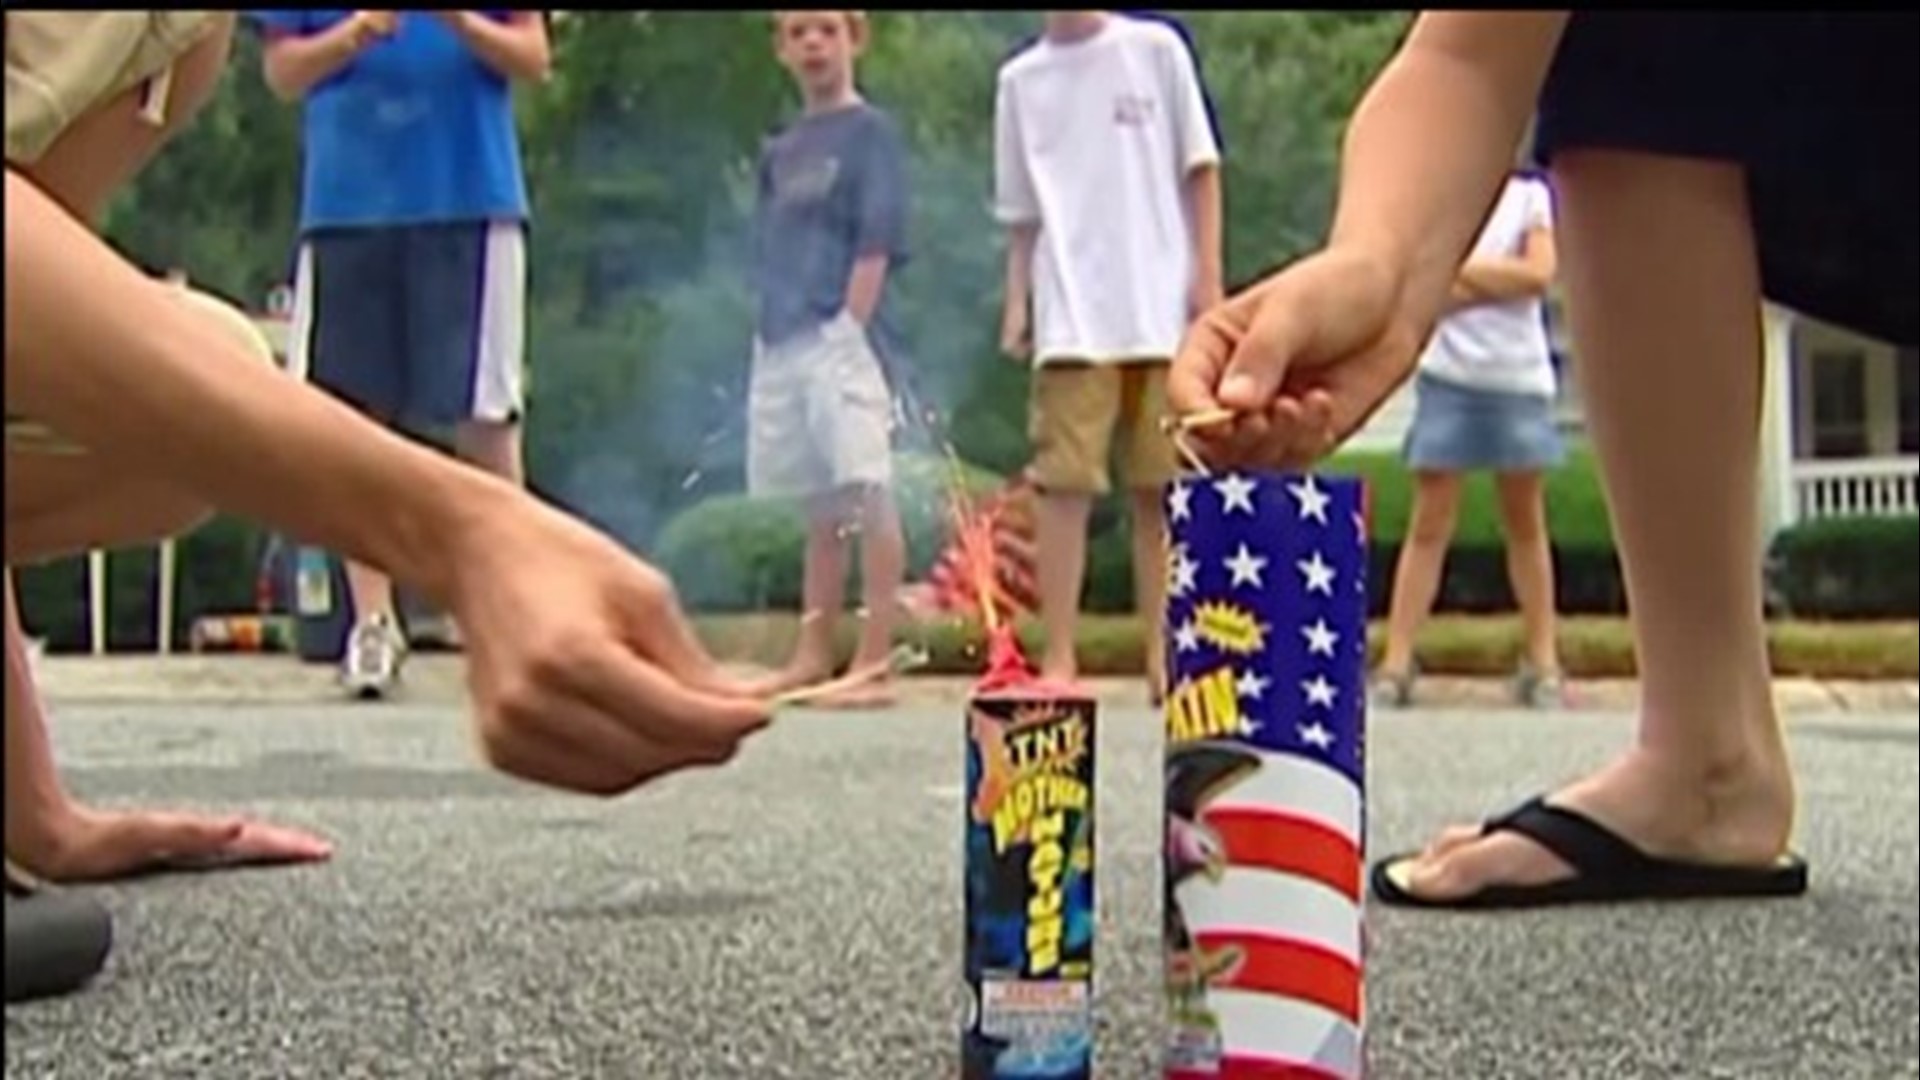 Prior to the law’s expansion, it was illegal for Pennsylvania residents to buy non-novelty fireworks in the state, but legal for people from out-of-state.